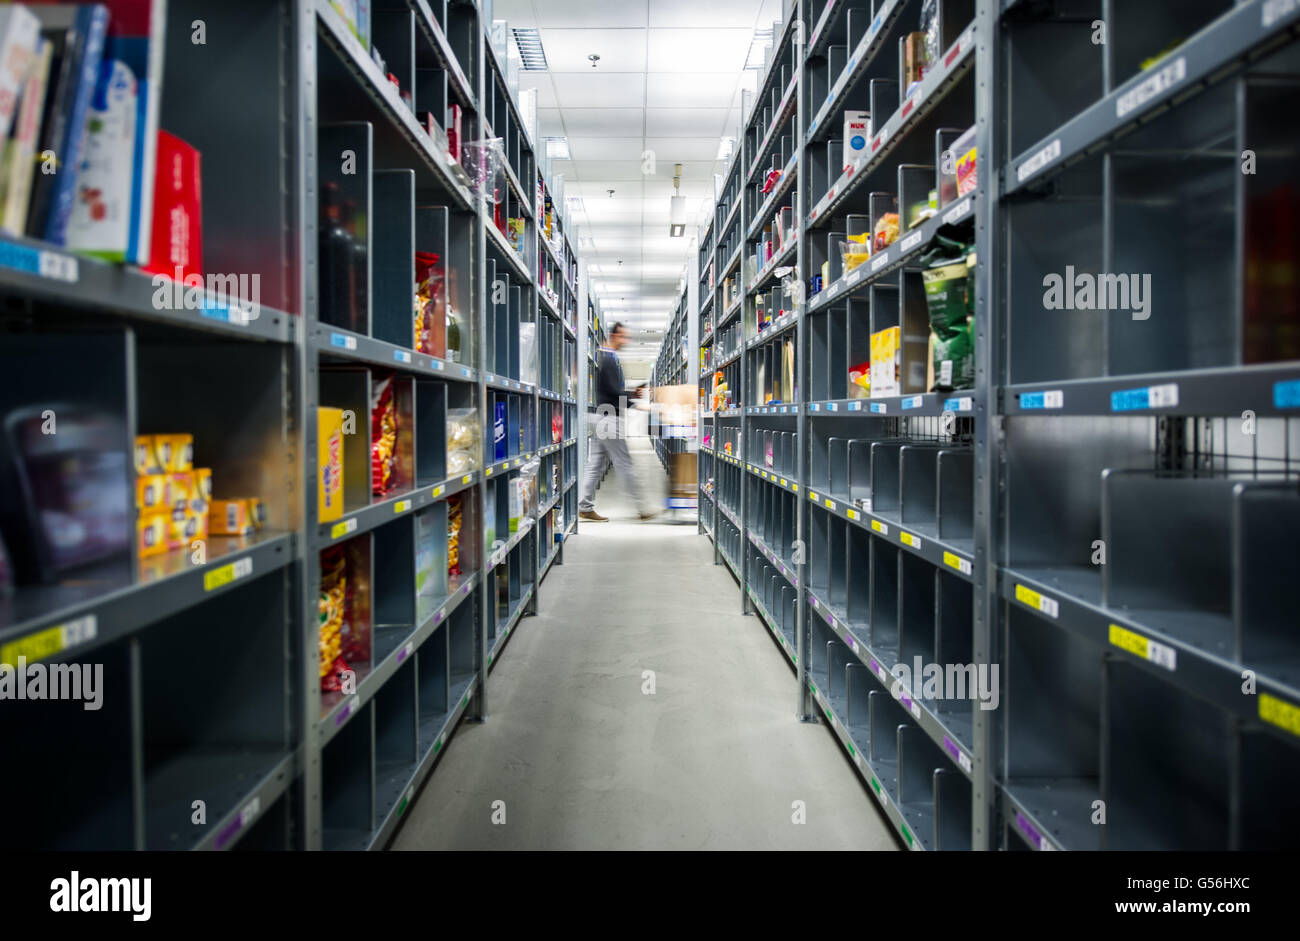 An Amazon Prime Now shelves in the warehouse in Berlin, Germany, 12 May  2016. Photo: Sophia Kembowski/dpa Stock Photo - Alamy